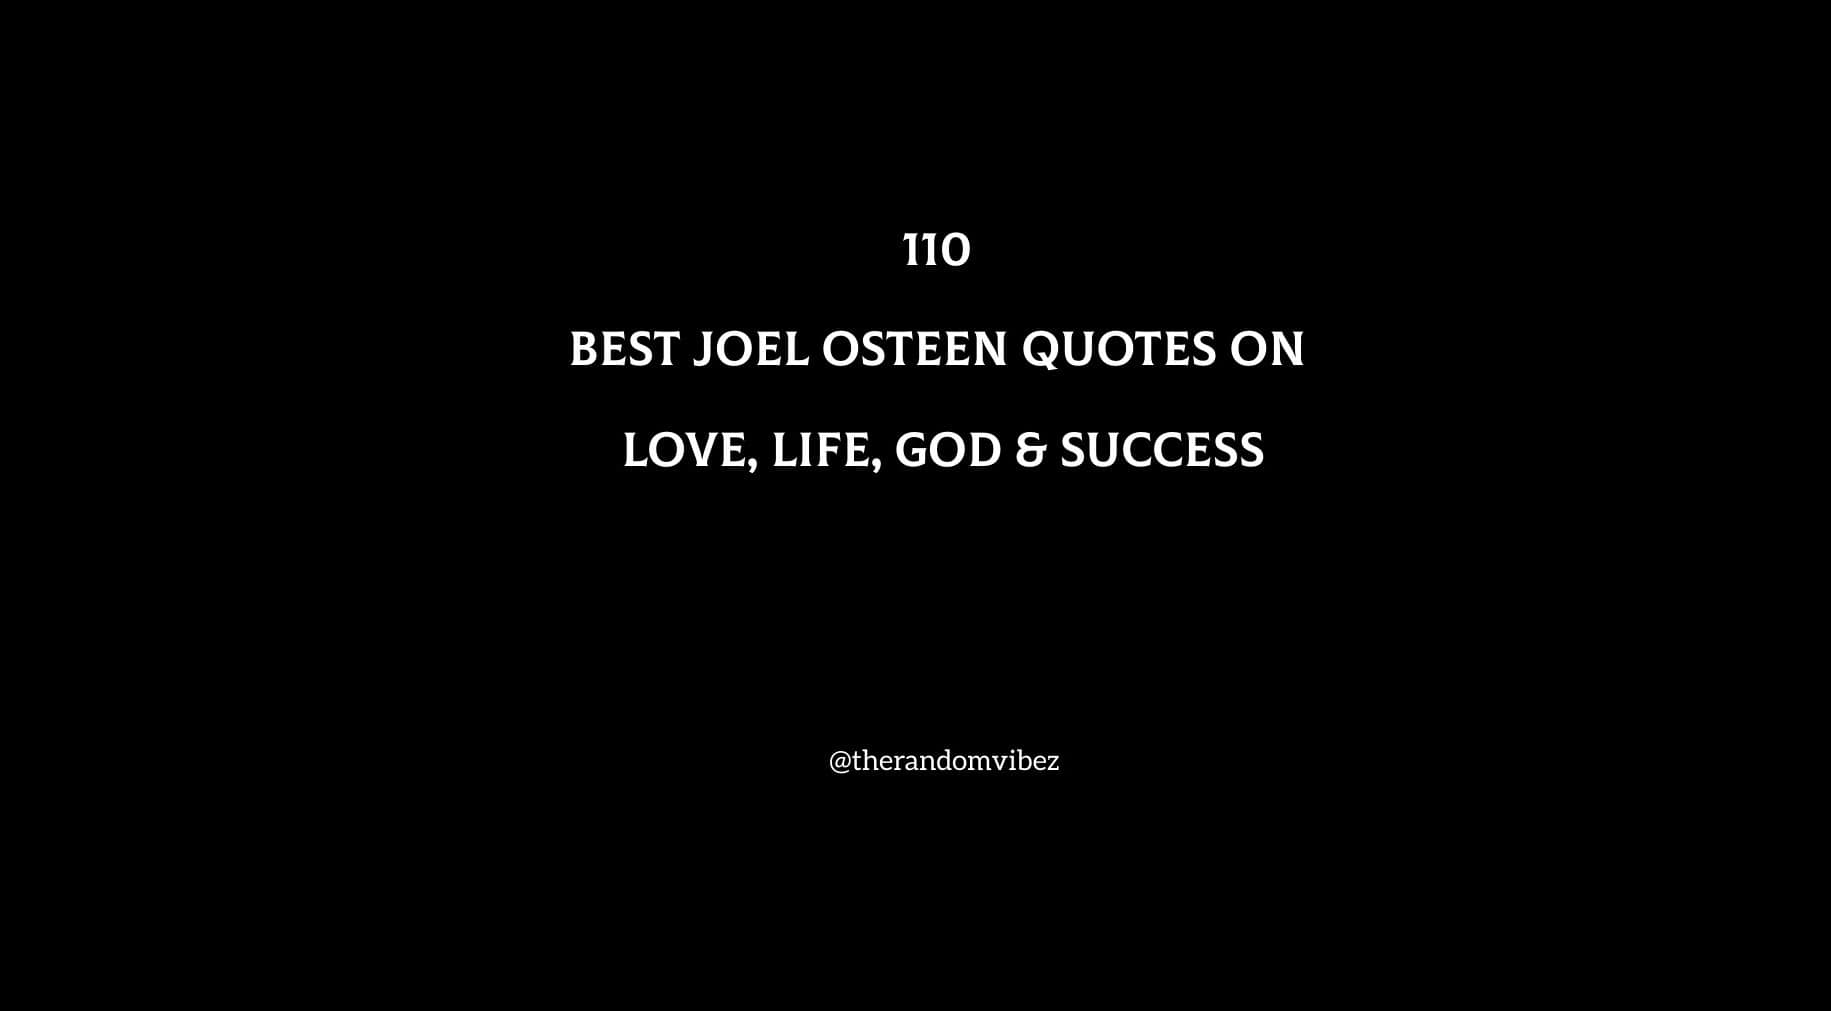 110 Best Joel Osteen Quotes On Love, Life, God & Success